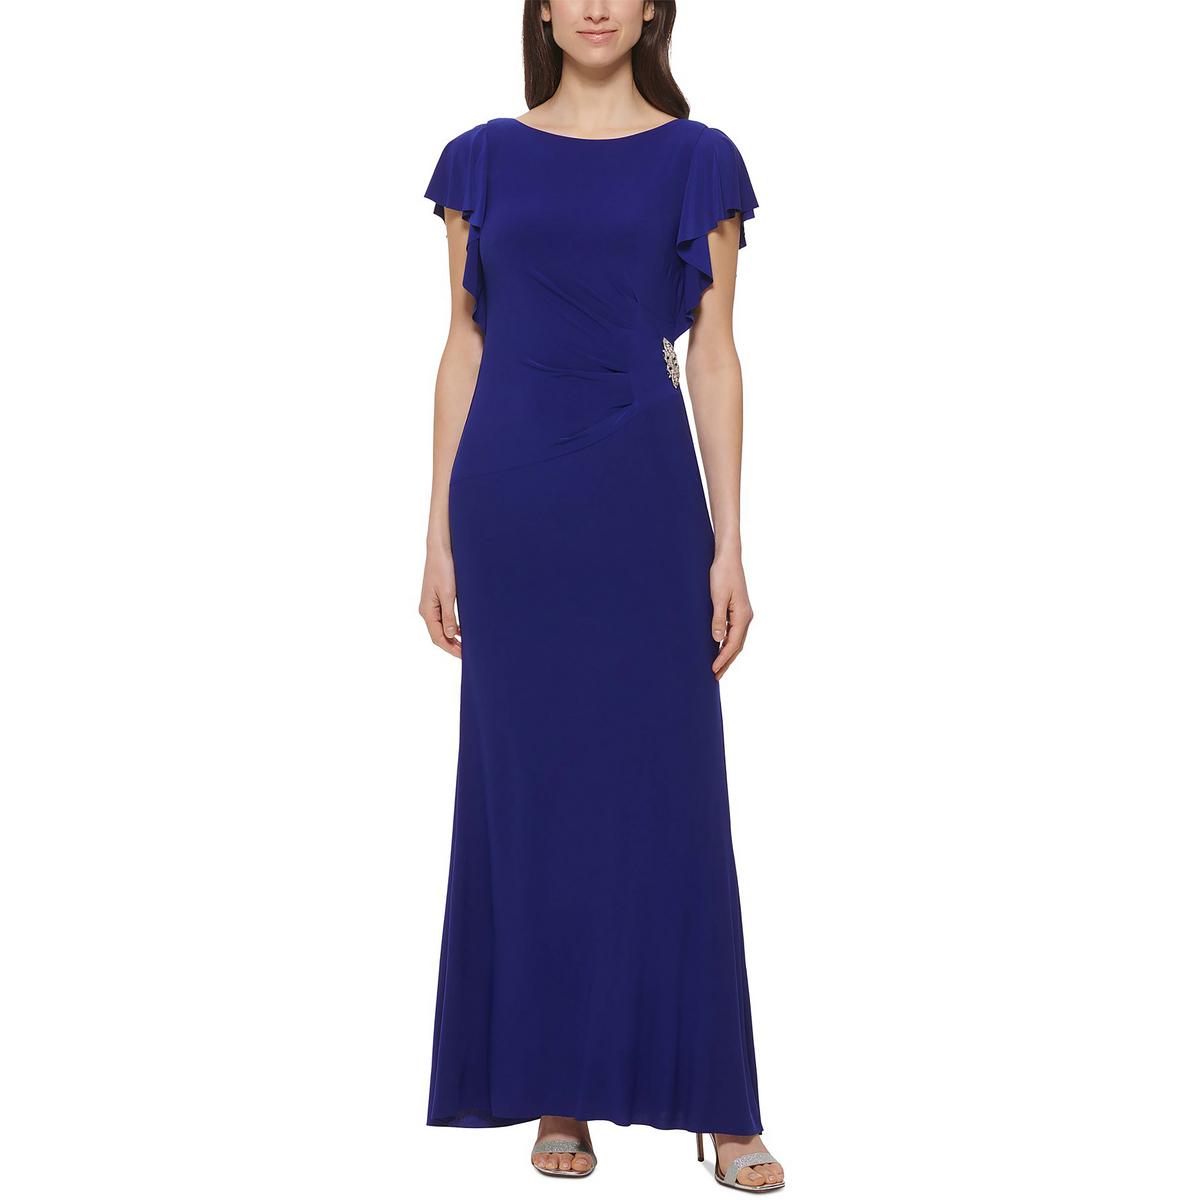 Jessica Carlyle Womens Gathered Long Evening Dress